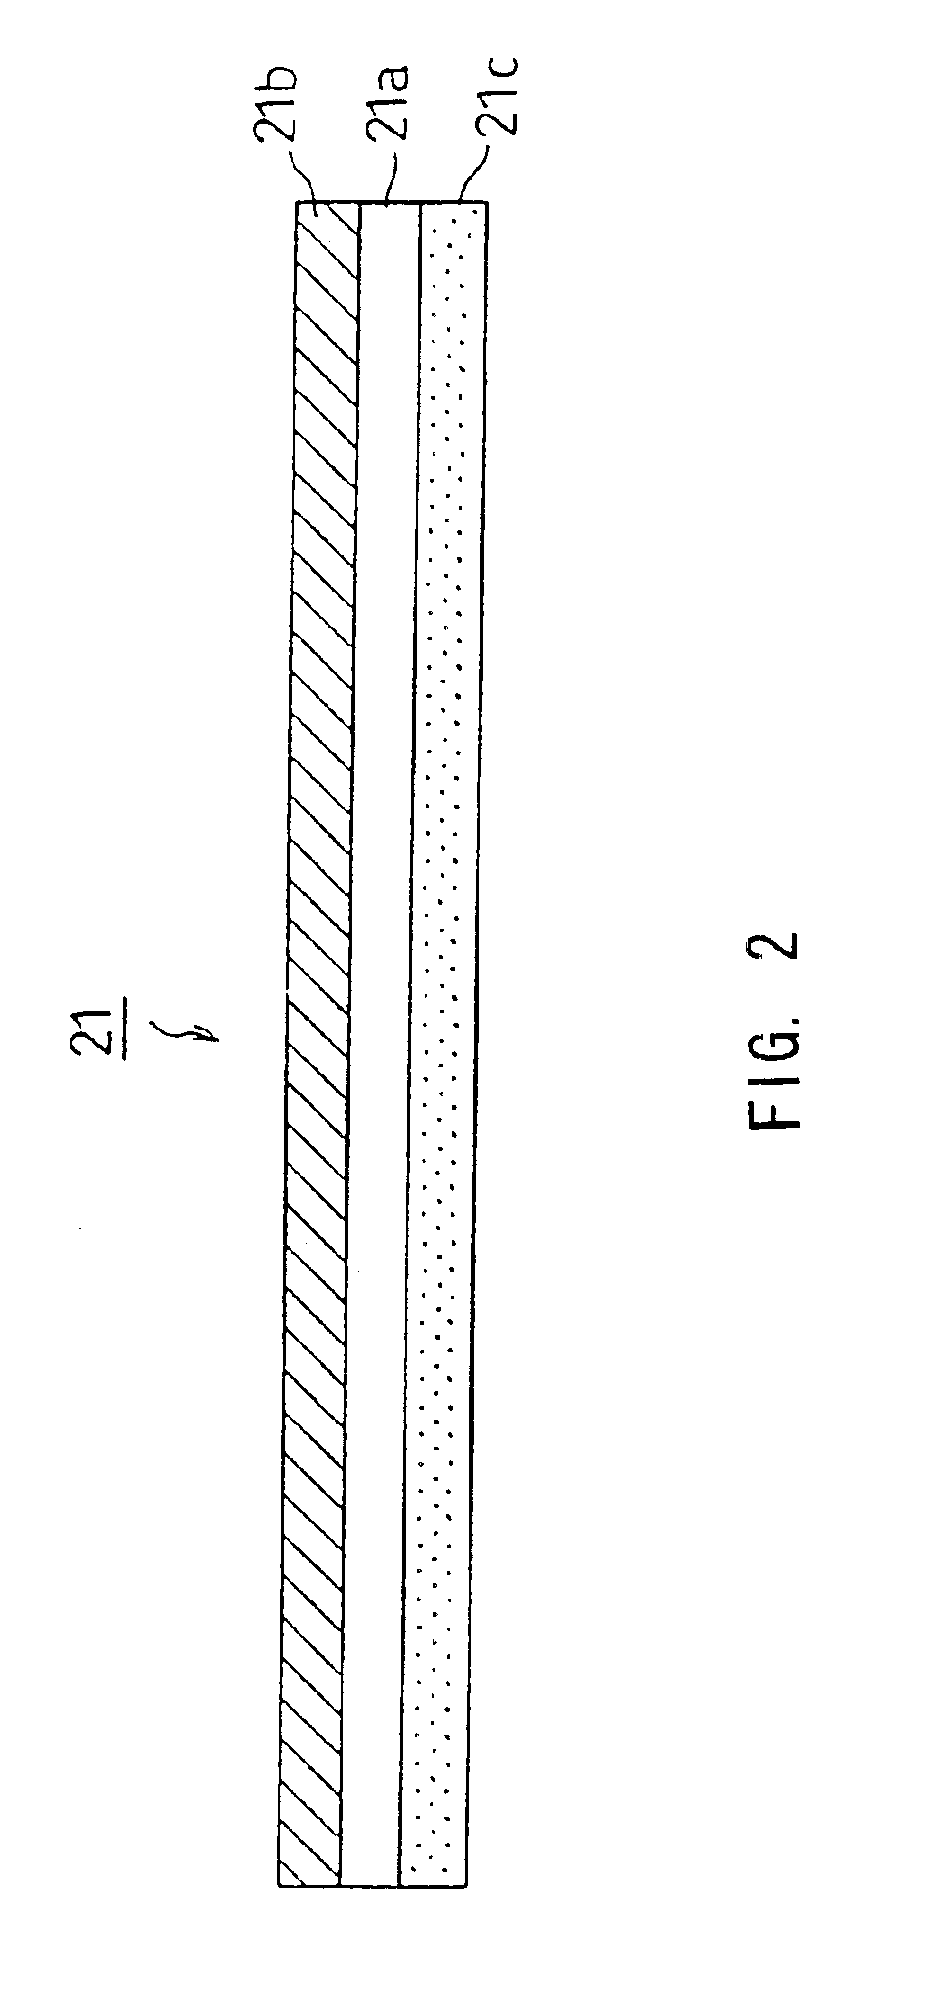 Photosensitive device, image forming apparatus and method for forming images